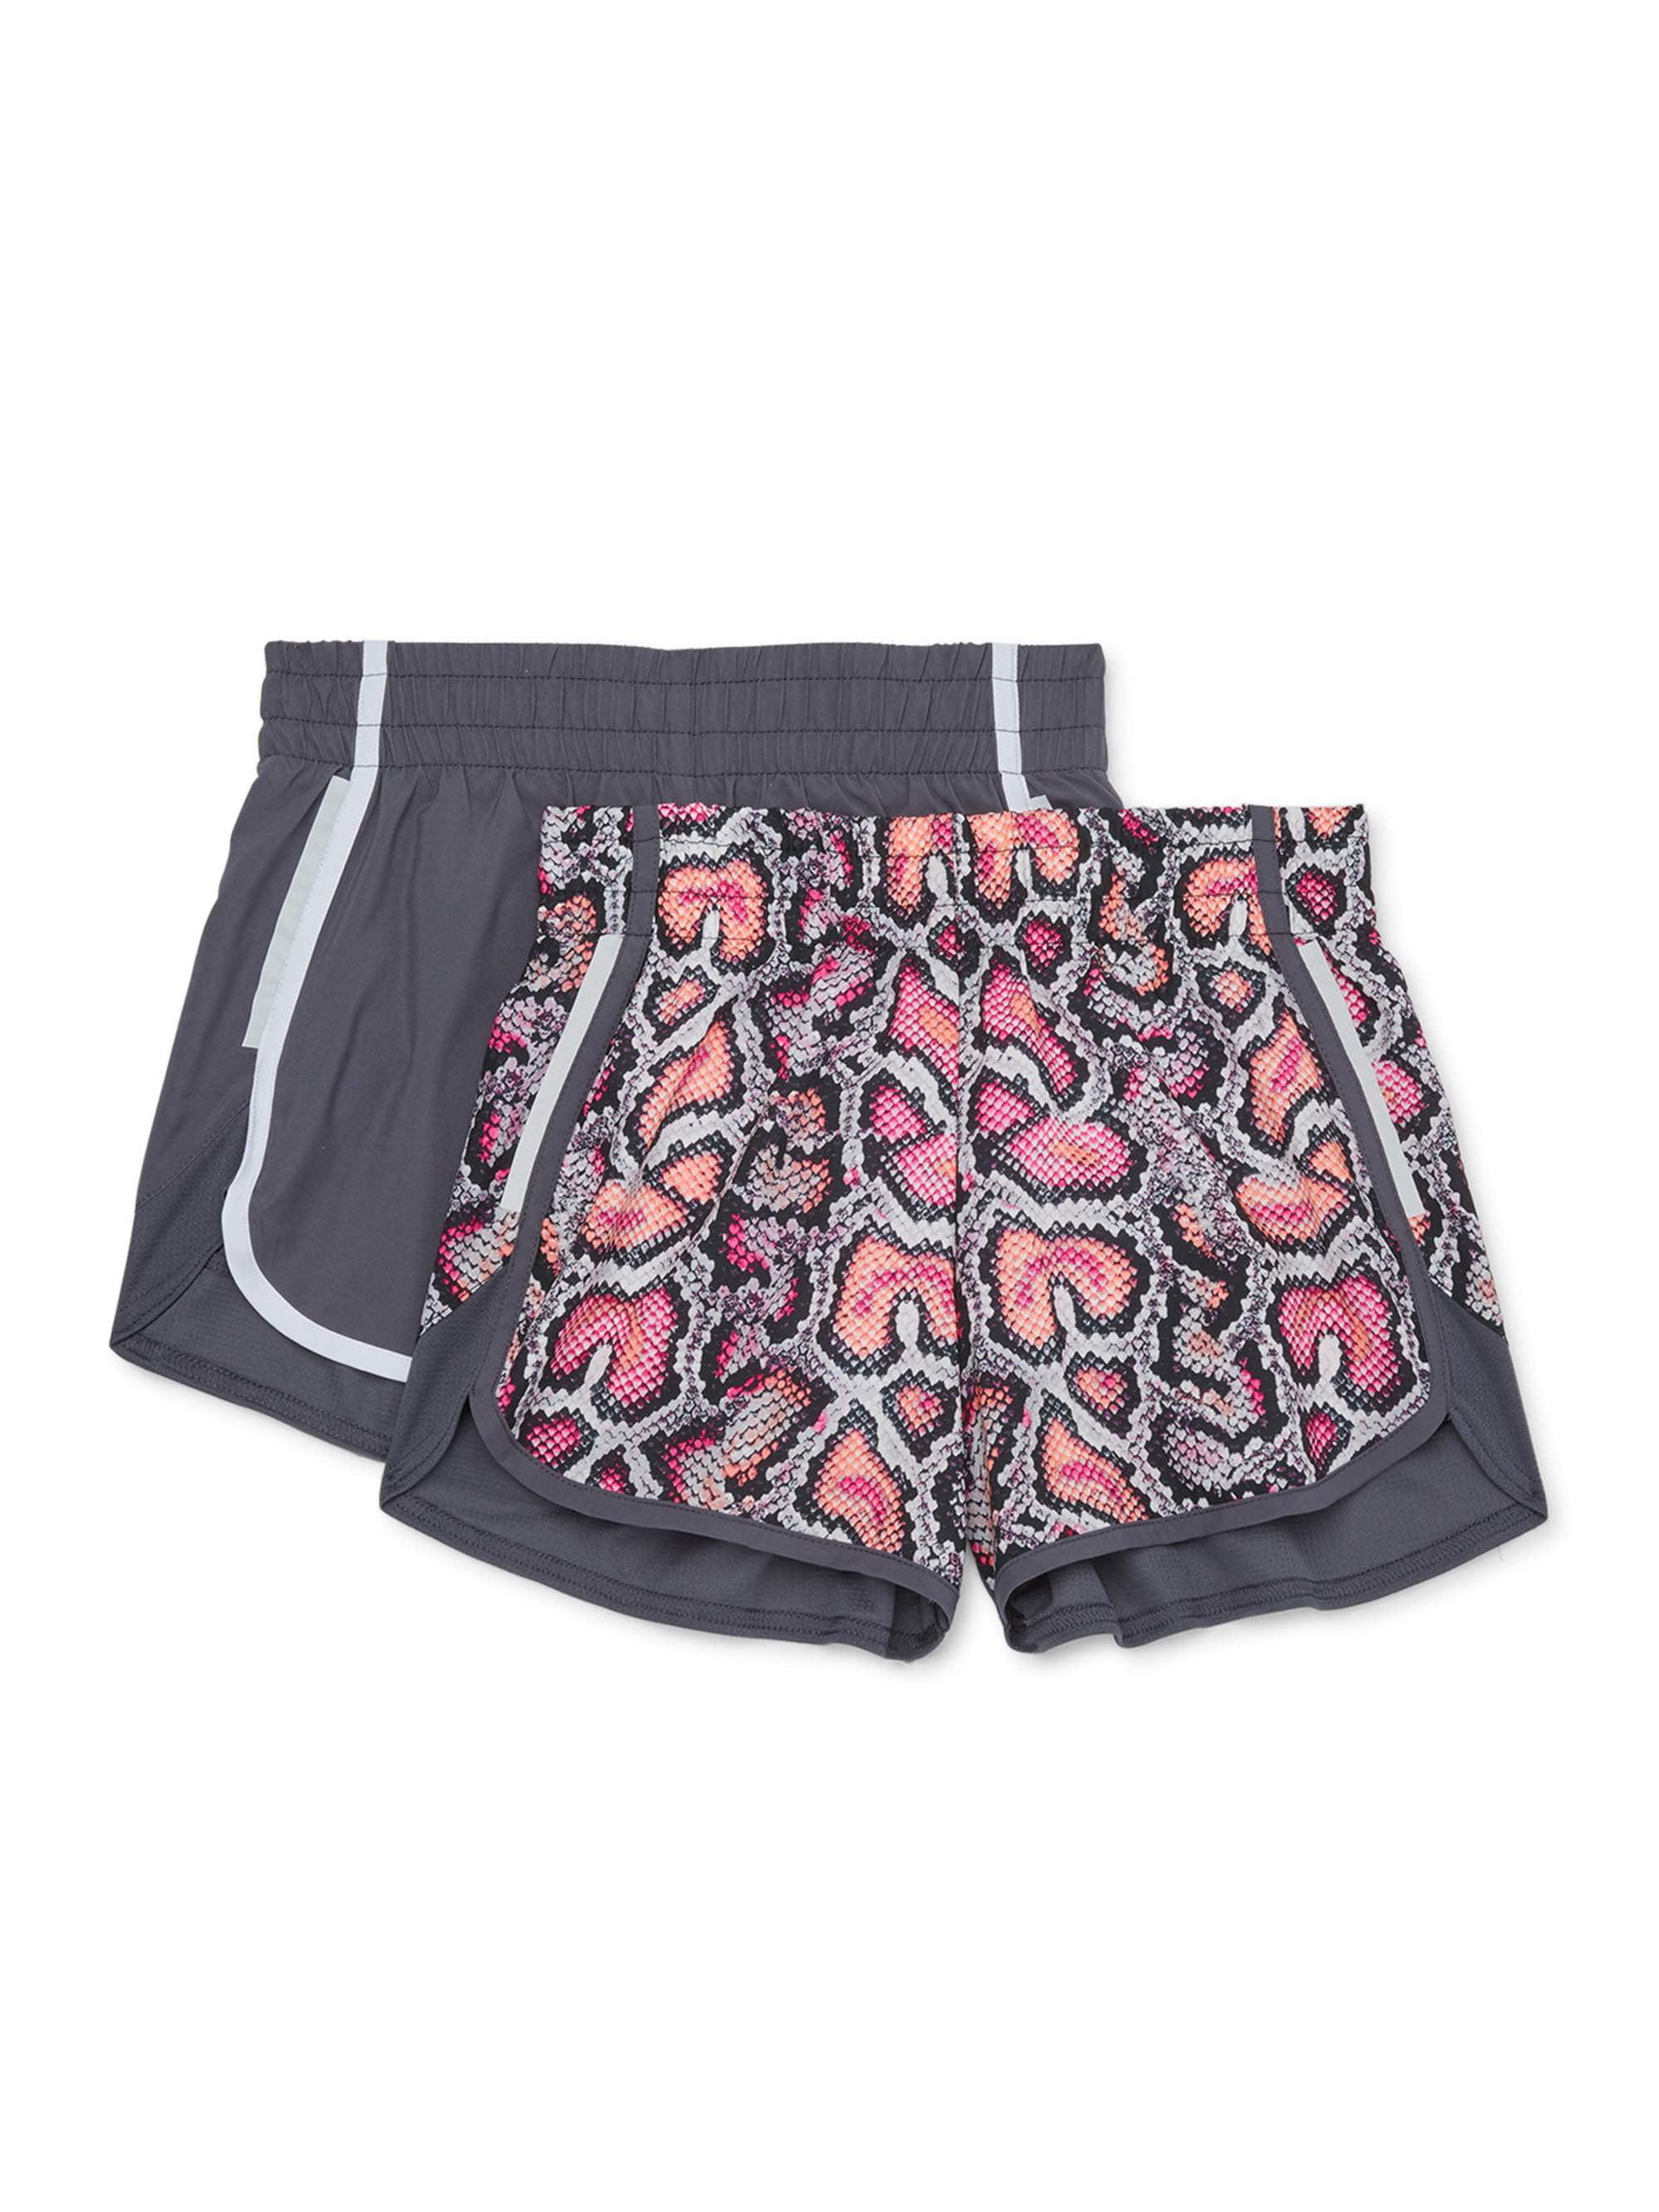 Athletic Works Girls Print & Solid Active Running Shorts, 2-Pack, Sizes  4-18 & Plus - Walmart.com